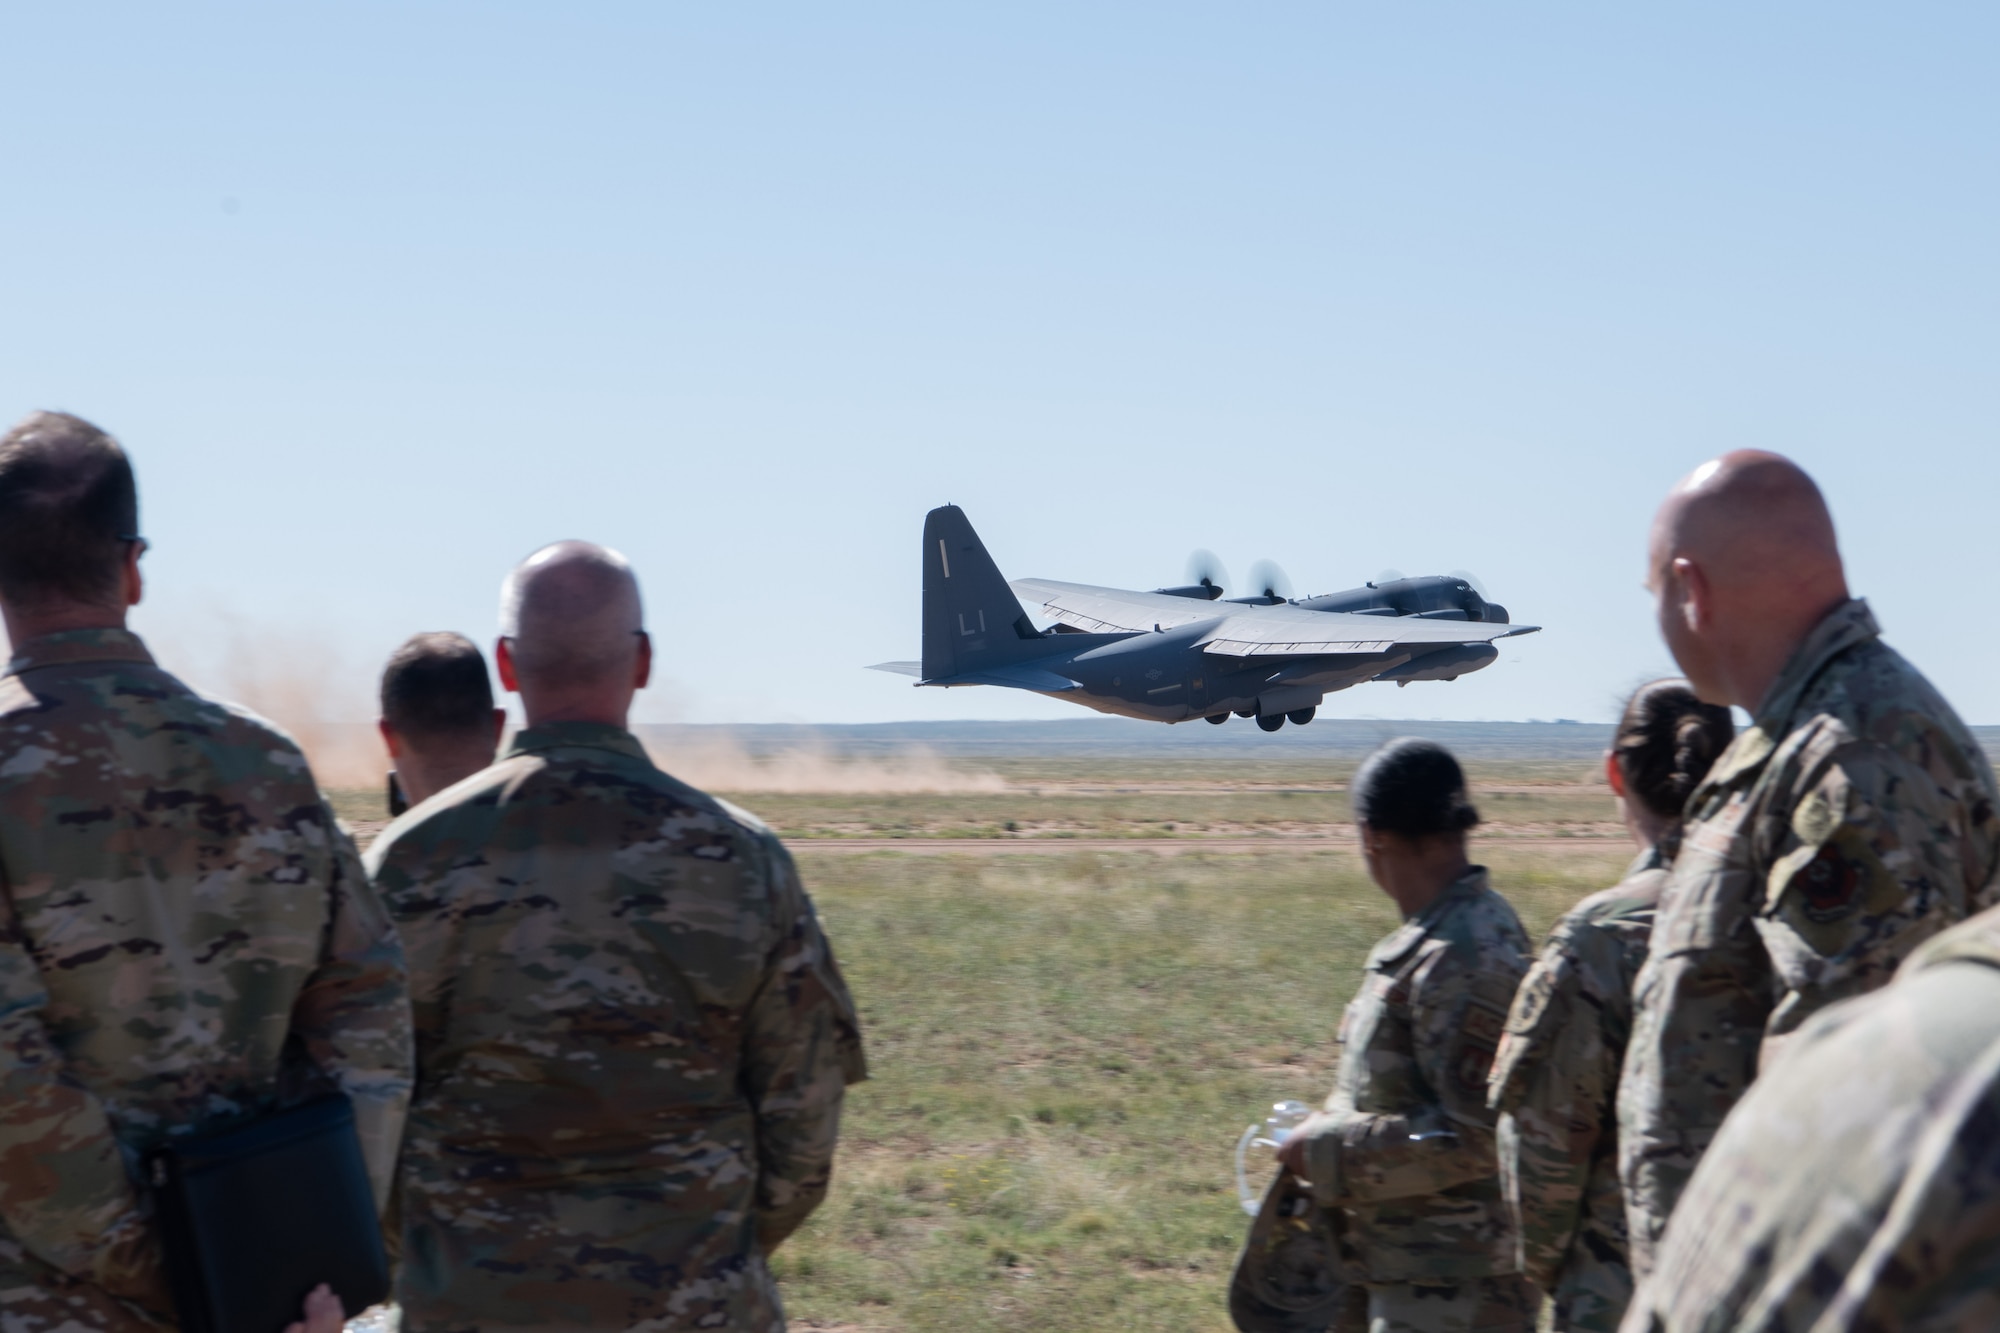 An MC-130J Commando II assigned to the 9th Special Operations Squadron takes off at Melrose Air Force Range, Melrose, N.M.